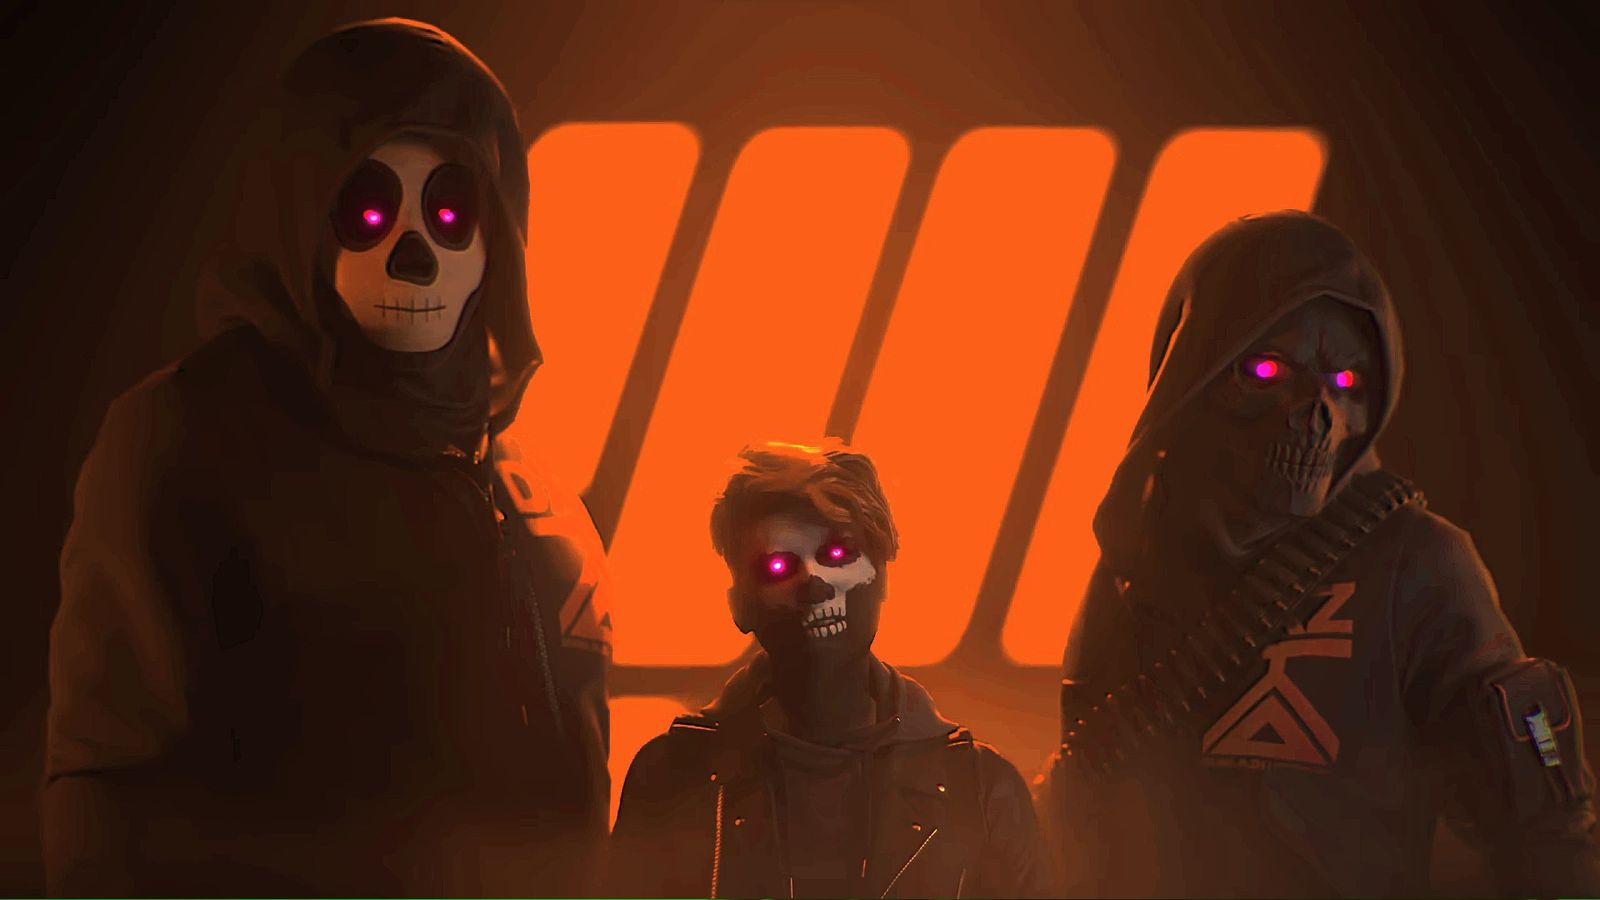 The Finals: three people in skull masks and black clothing stand in front of an orange light.